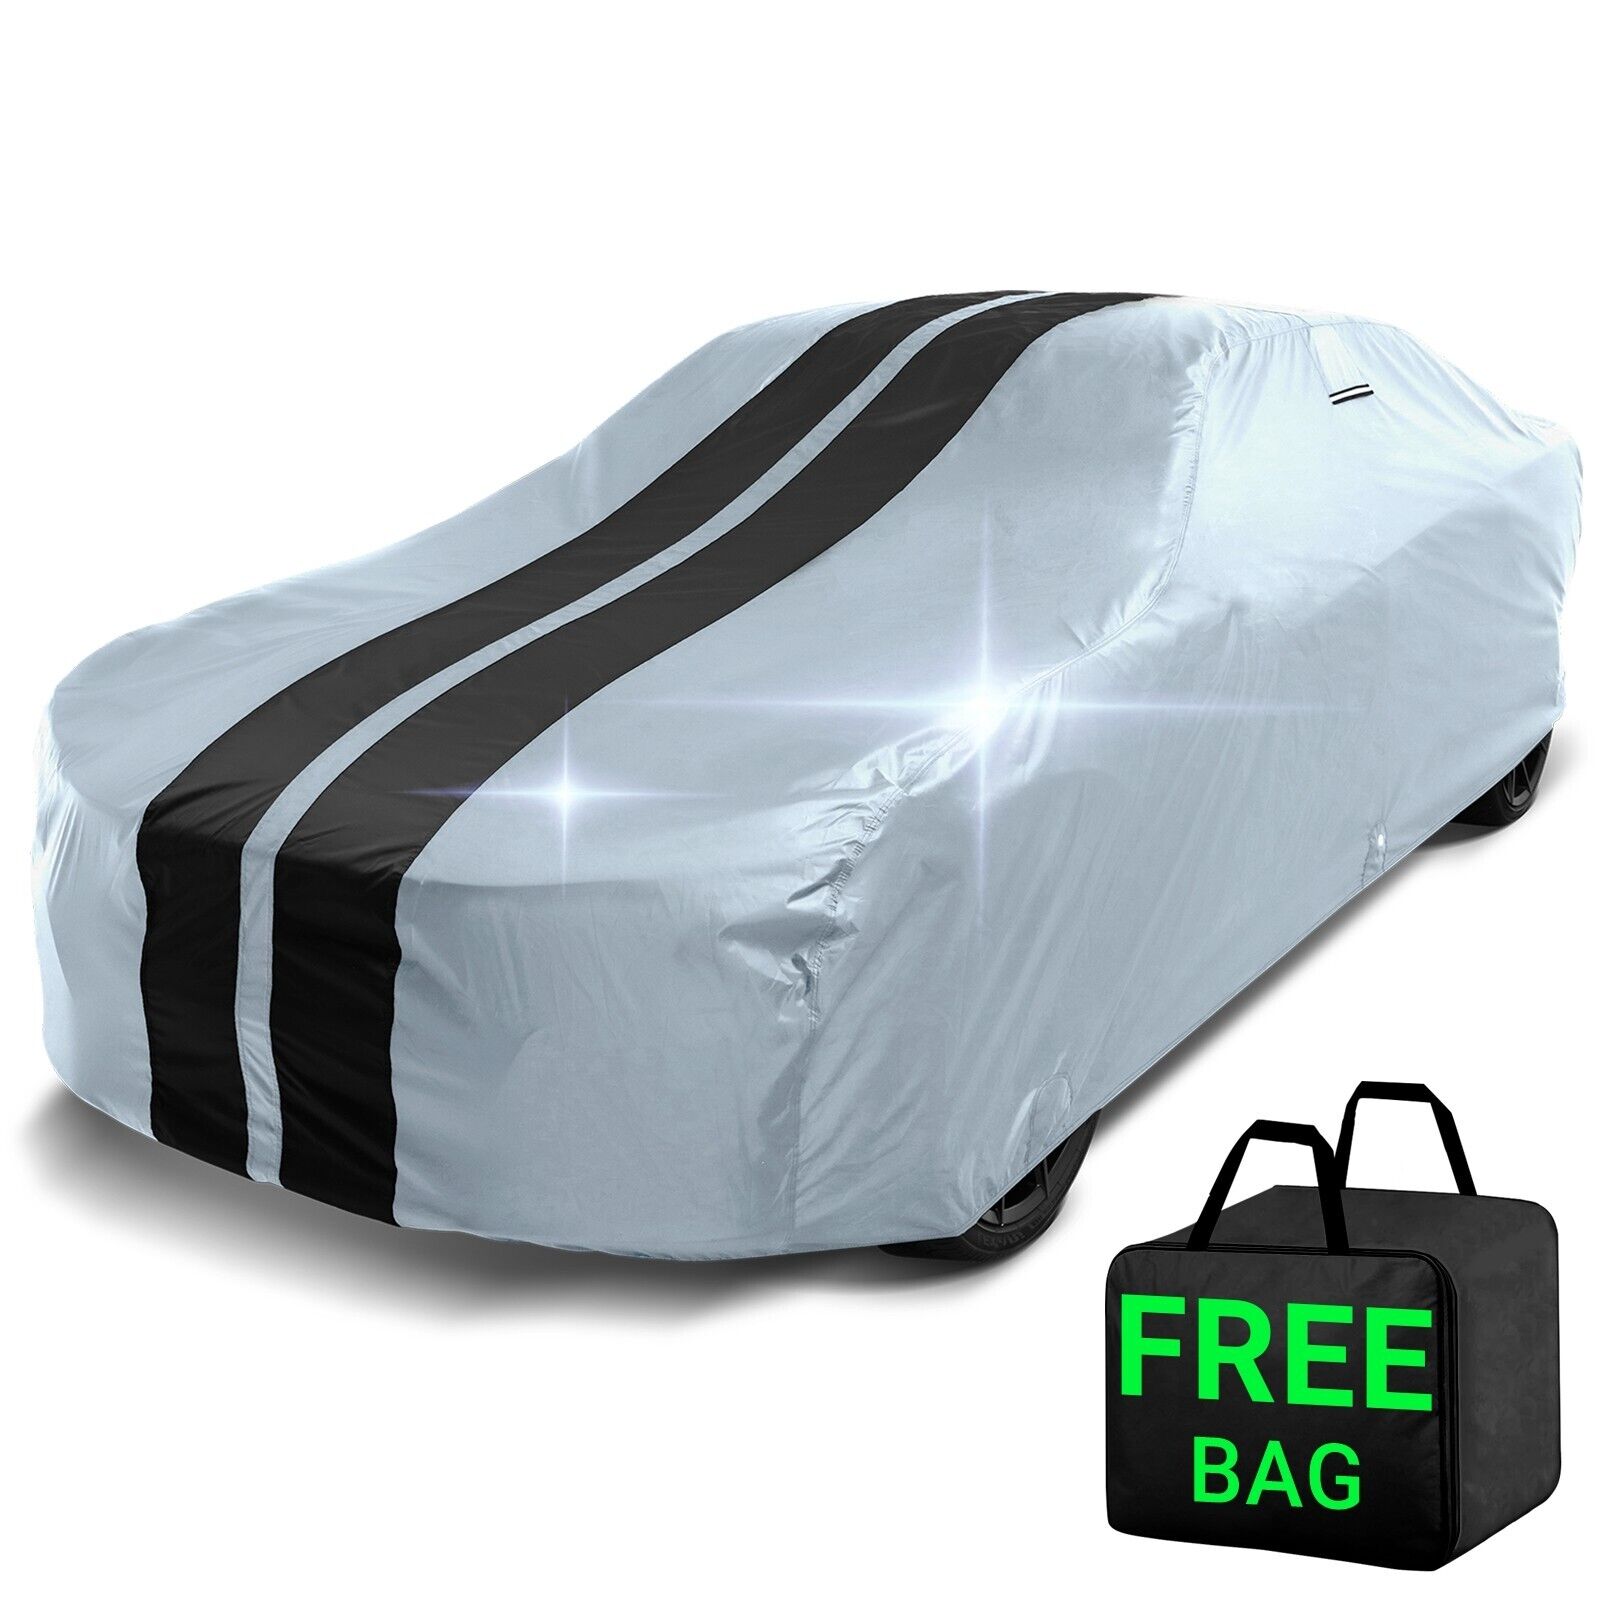 2007-2012 Lotus Exige Custom Car Cover - All-Weather Waterproof Protection